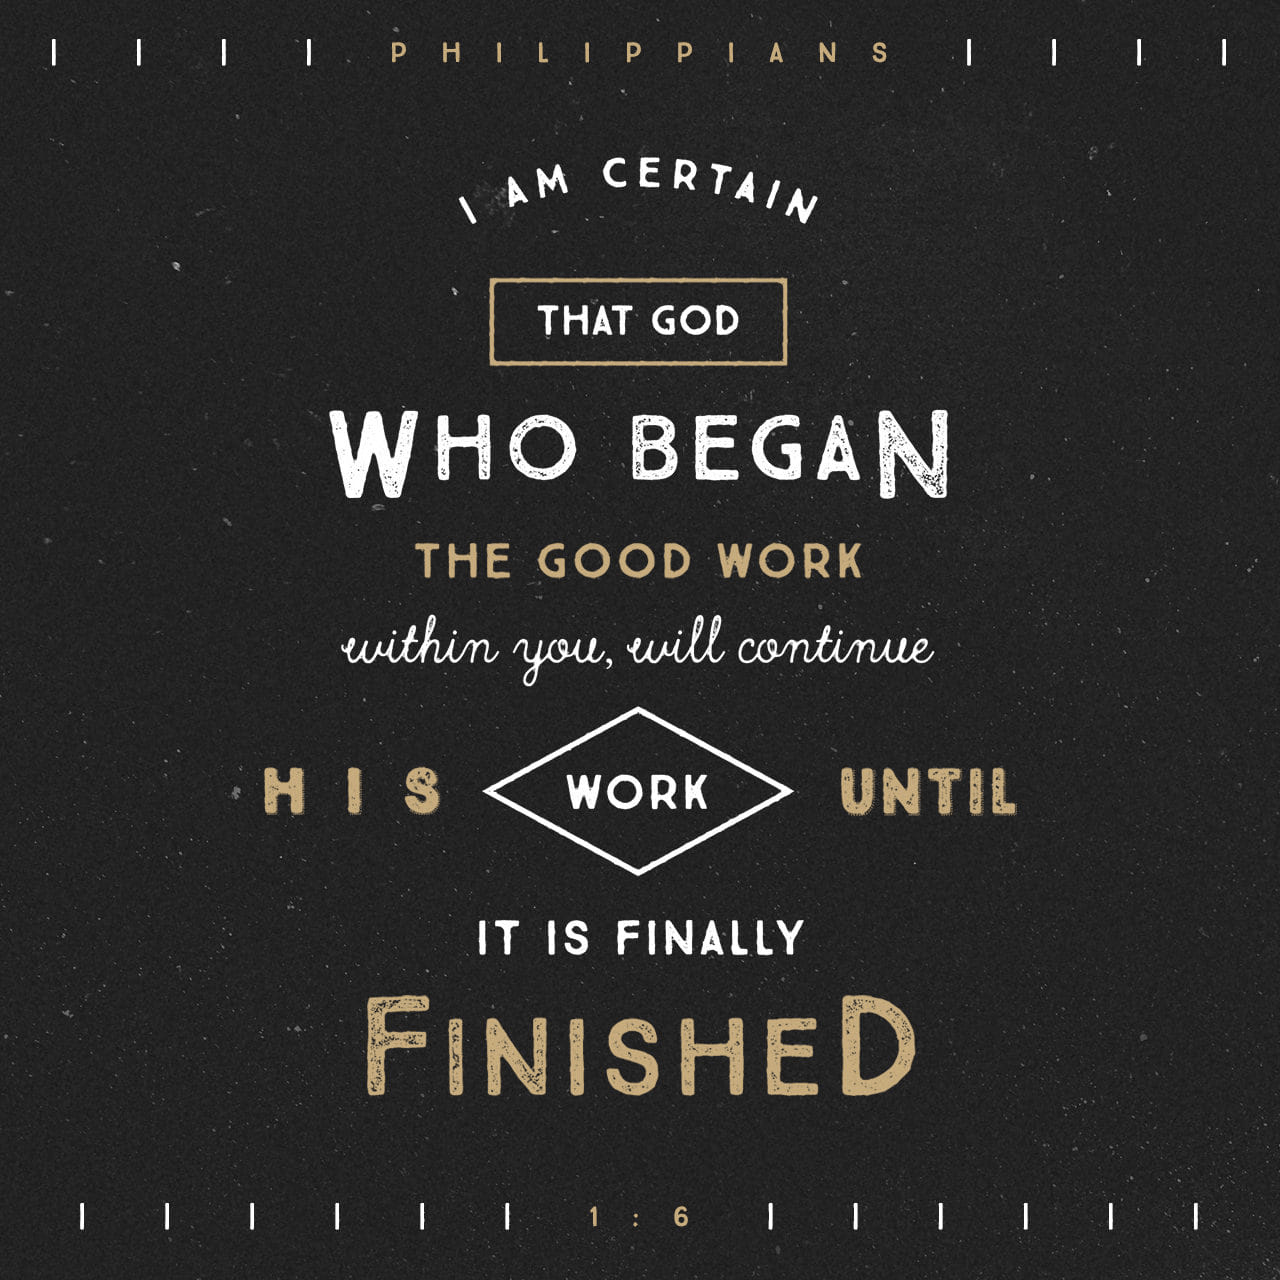 VOTD April 8 - “For I am confident of this very thing, that He who began a good work in you will perfect it until the day of Christ Jesus.” ‭‭Philippians‬ ‭1:6‬ ‭NASB‬‬